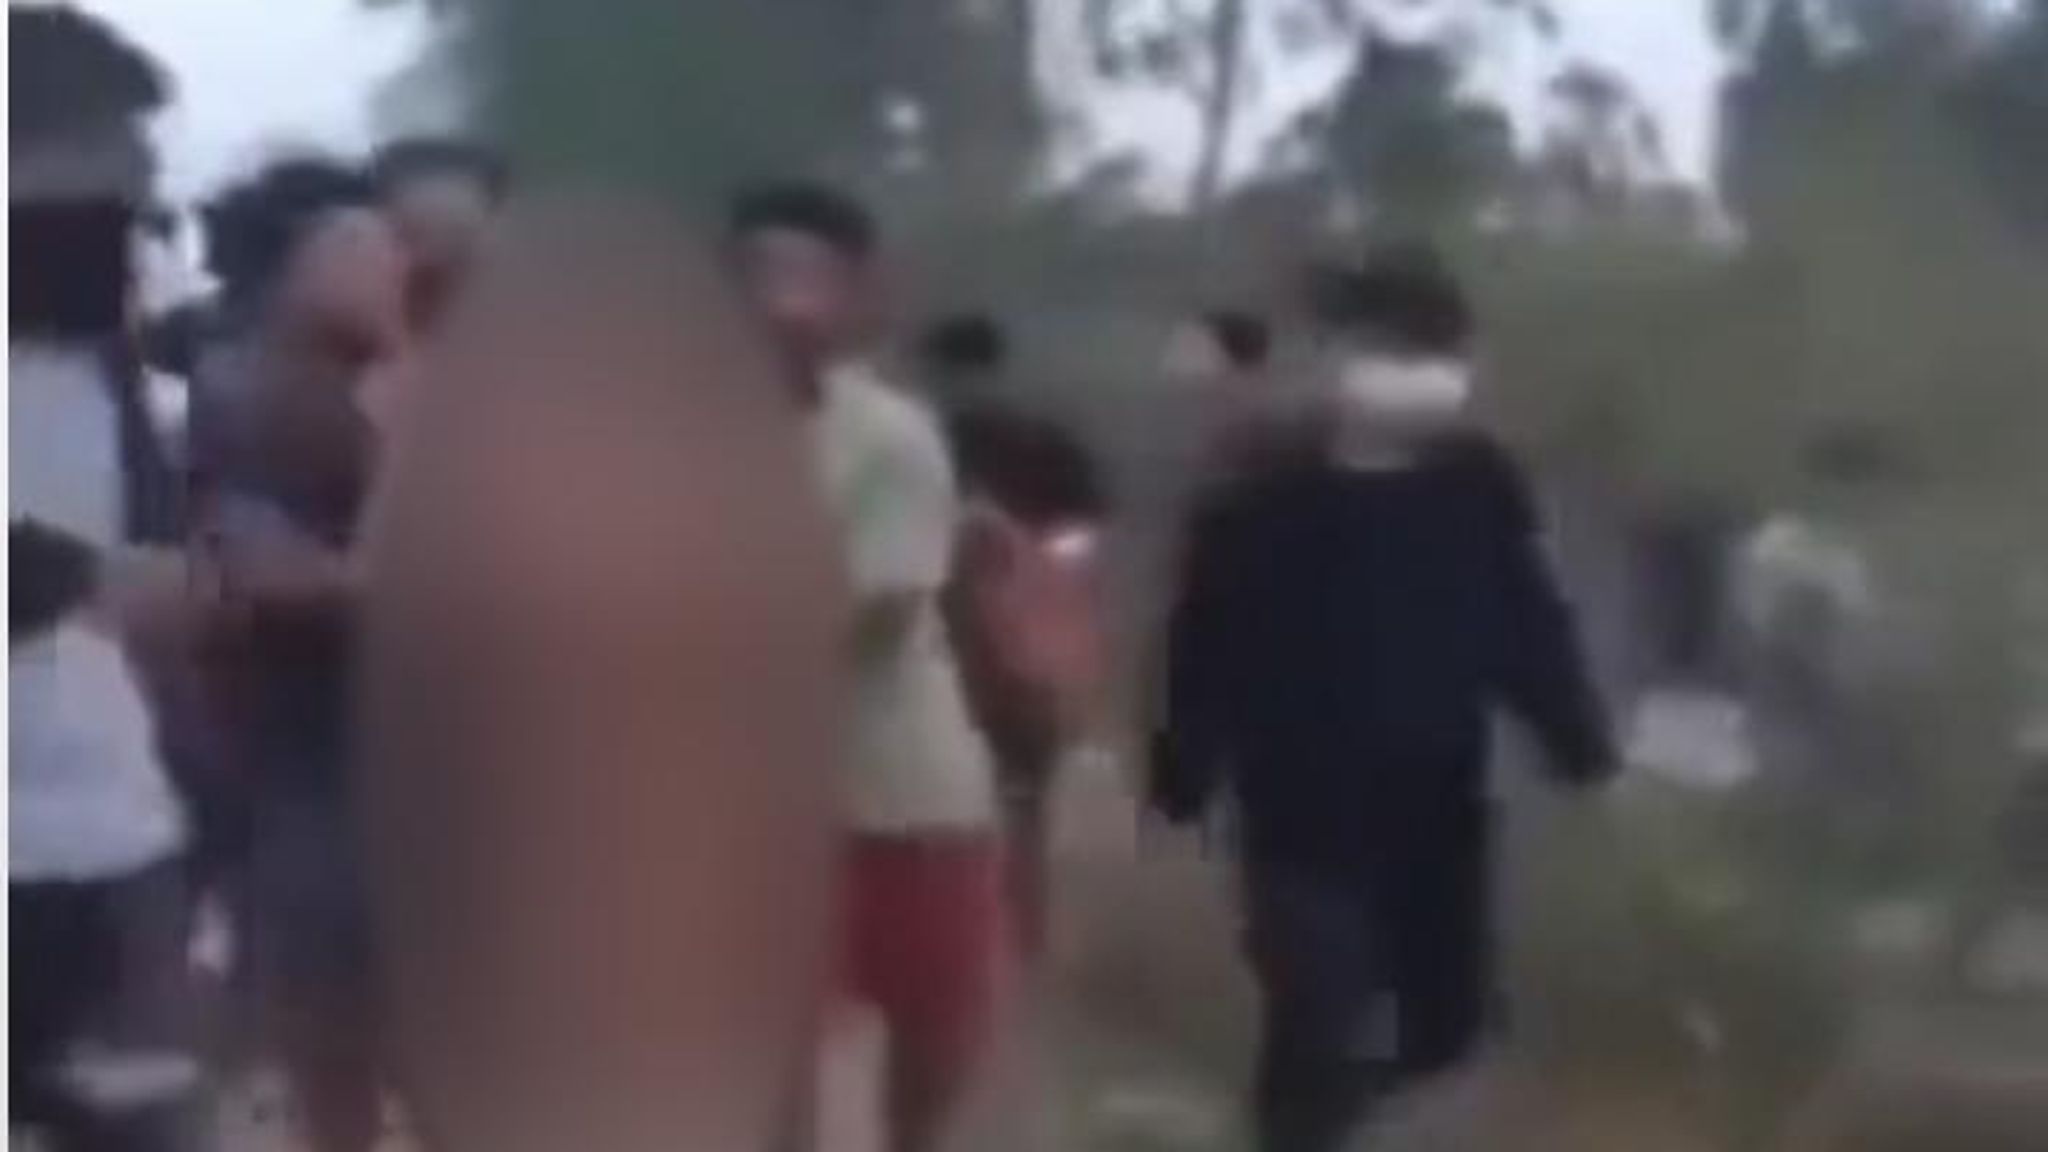 Rafe Xxx - Gang rape investigated as video shows abducted Indian women being paraded  naked in Manipur | World News | Sky News